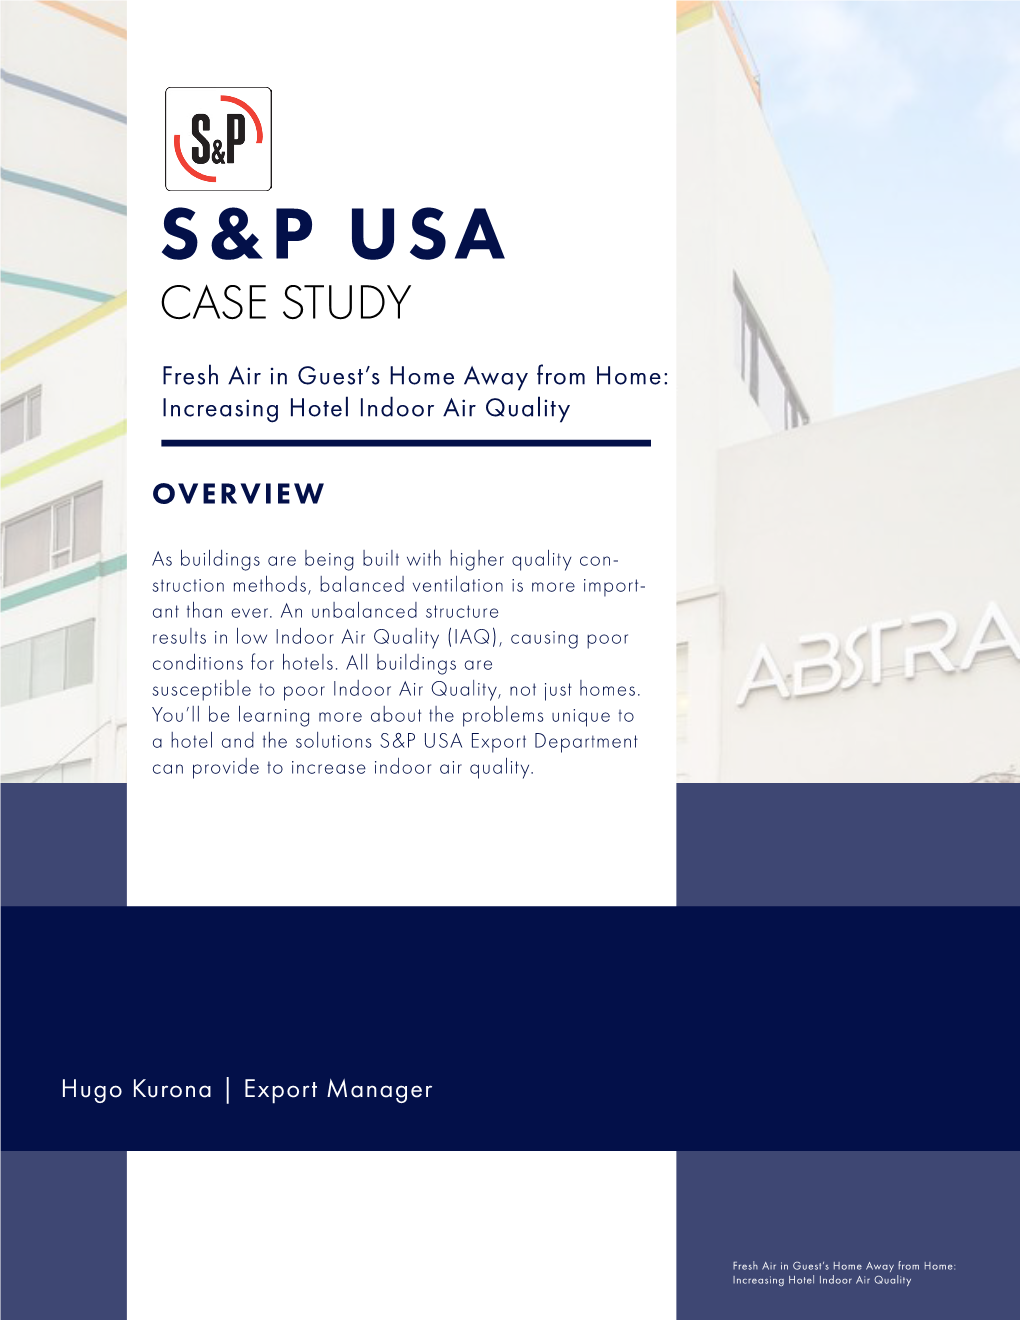 View Our Case Study